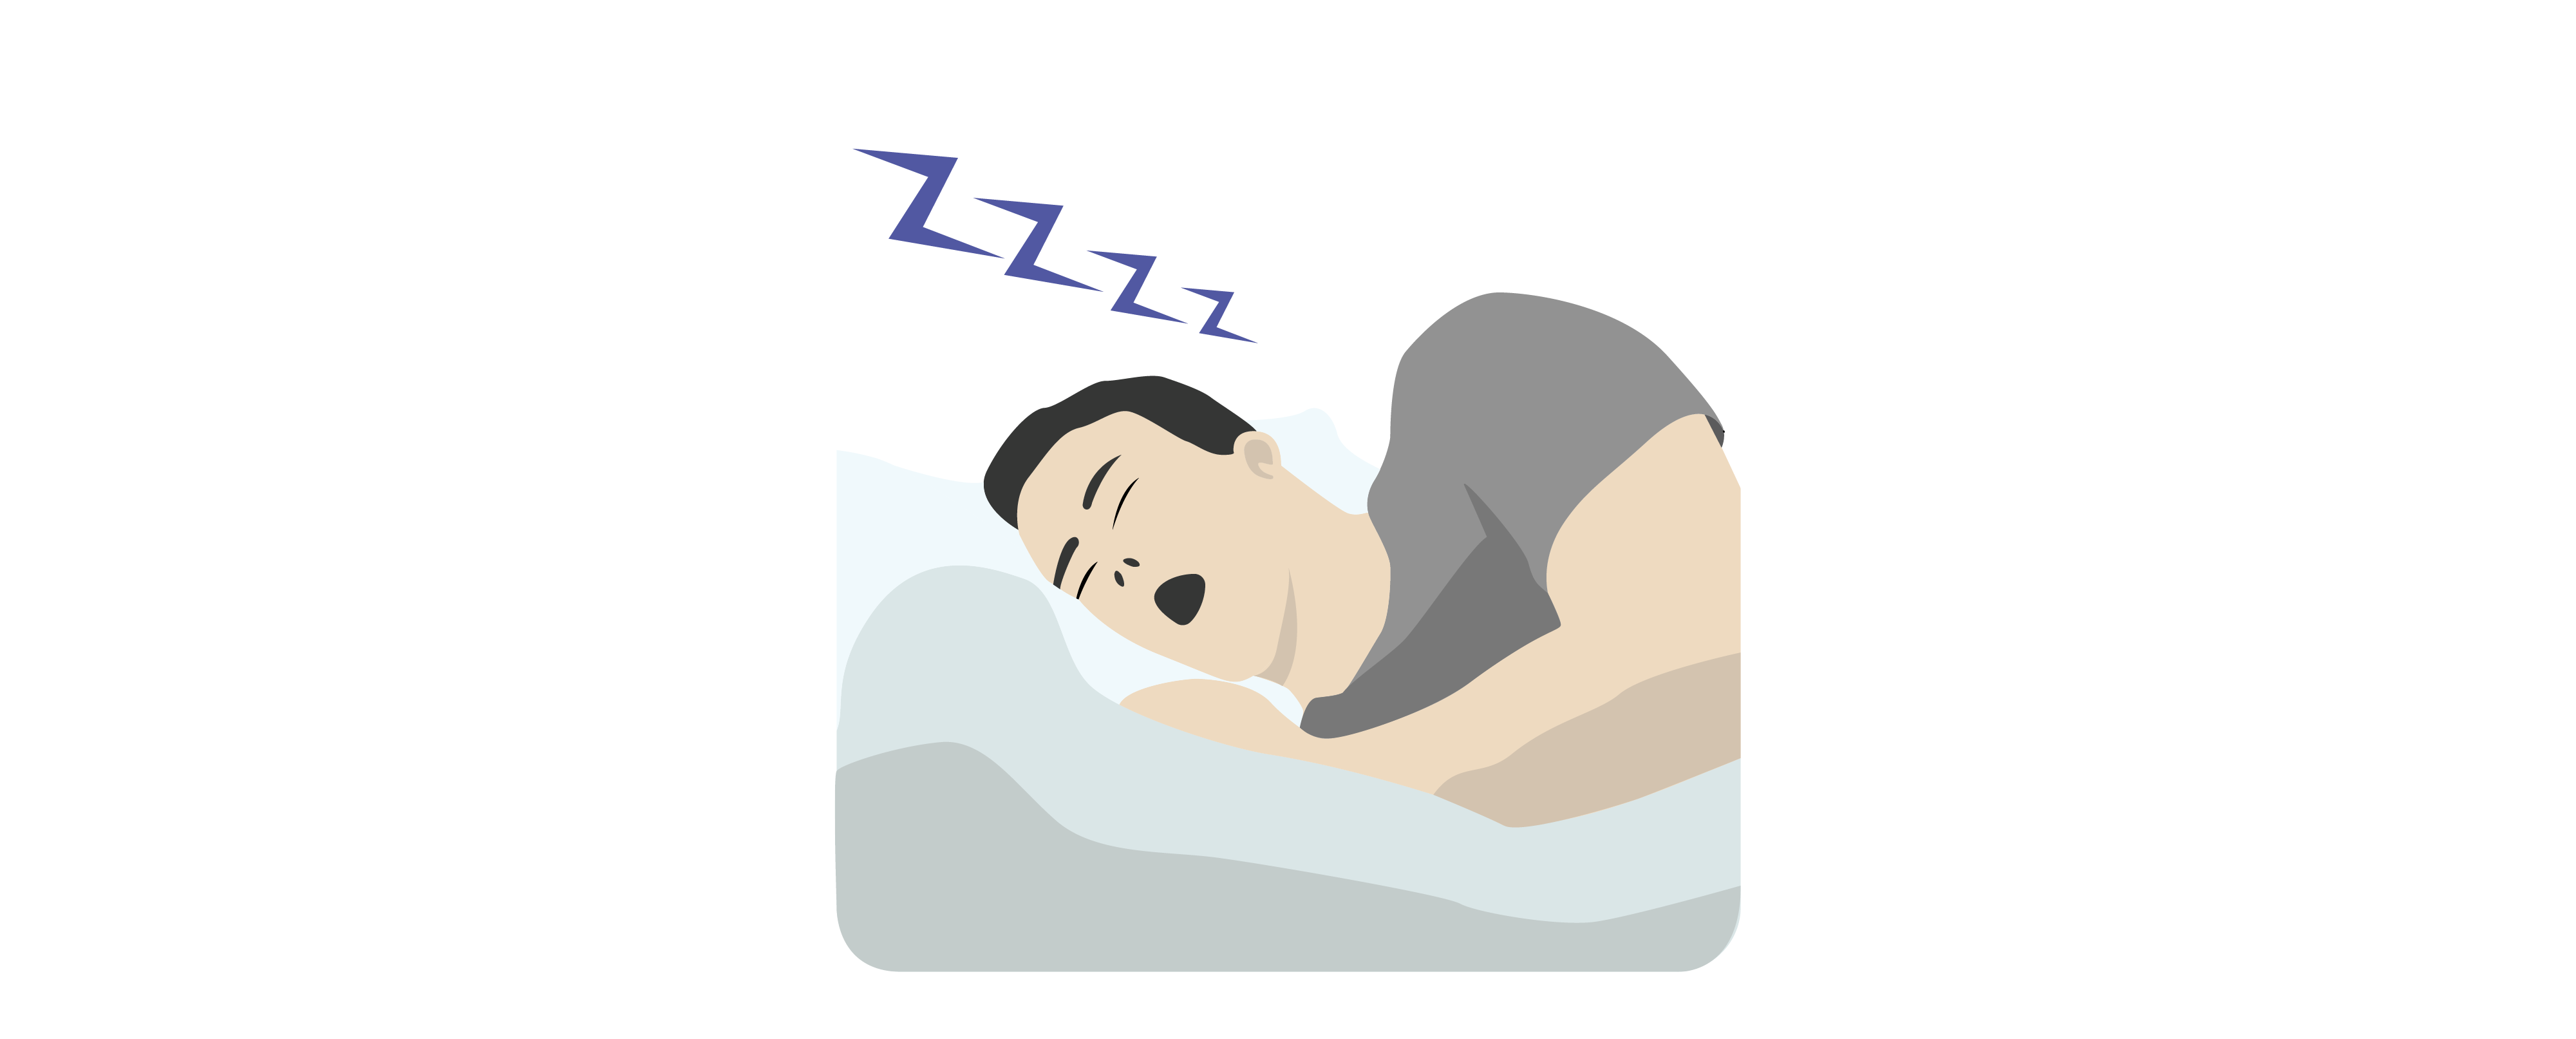 Person in grey shirt sleeps in bed. Zzzz above the person’s head.